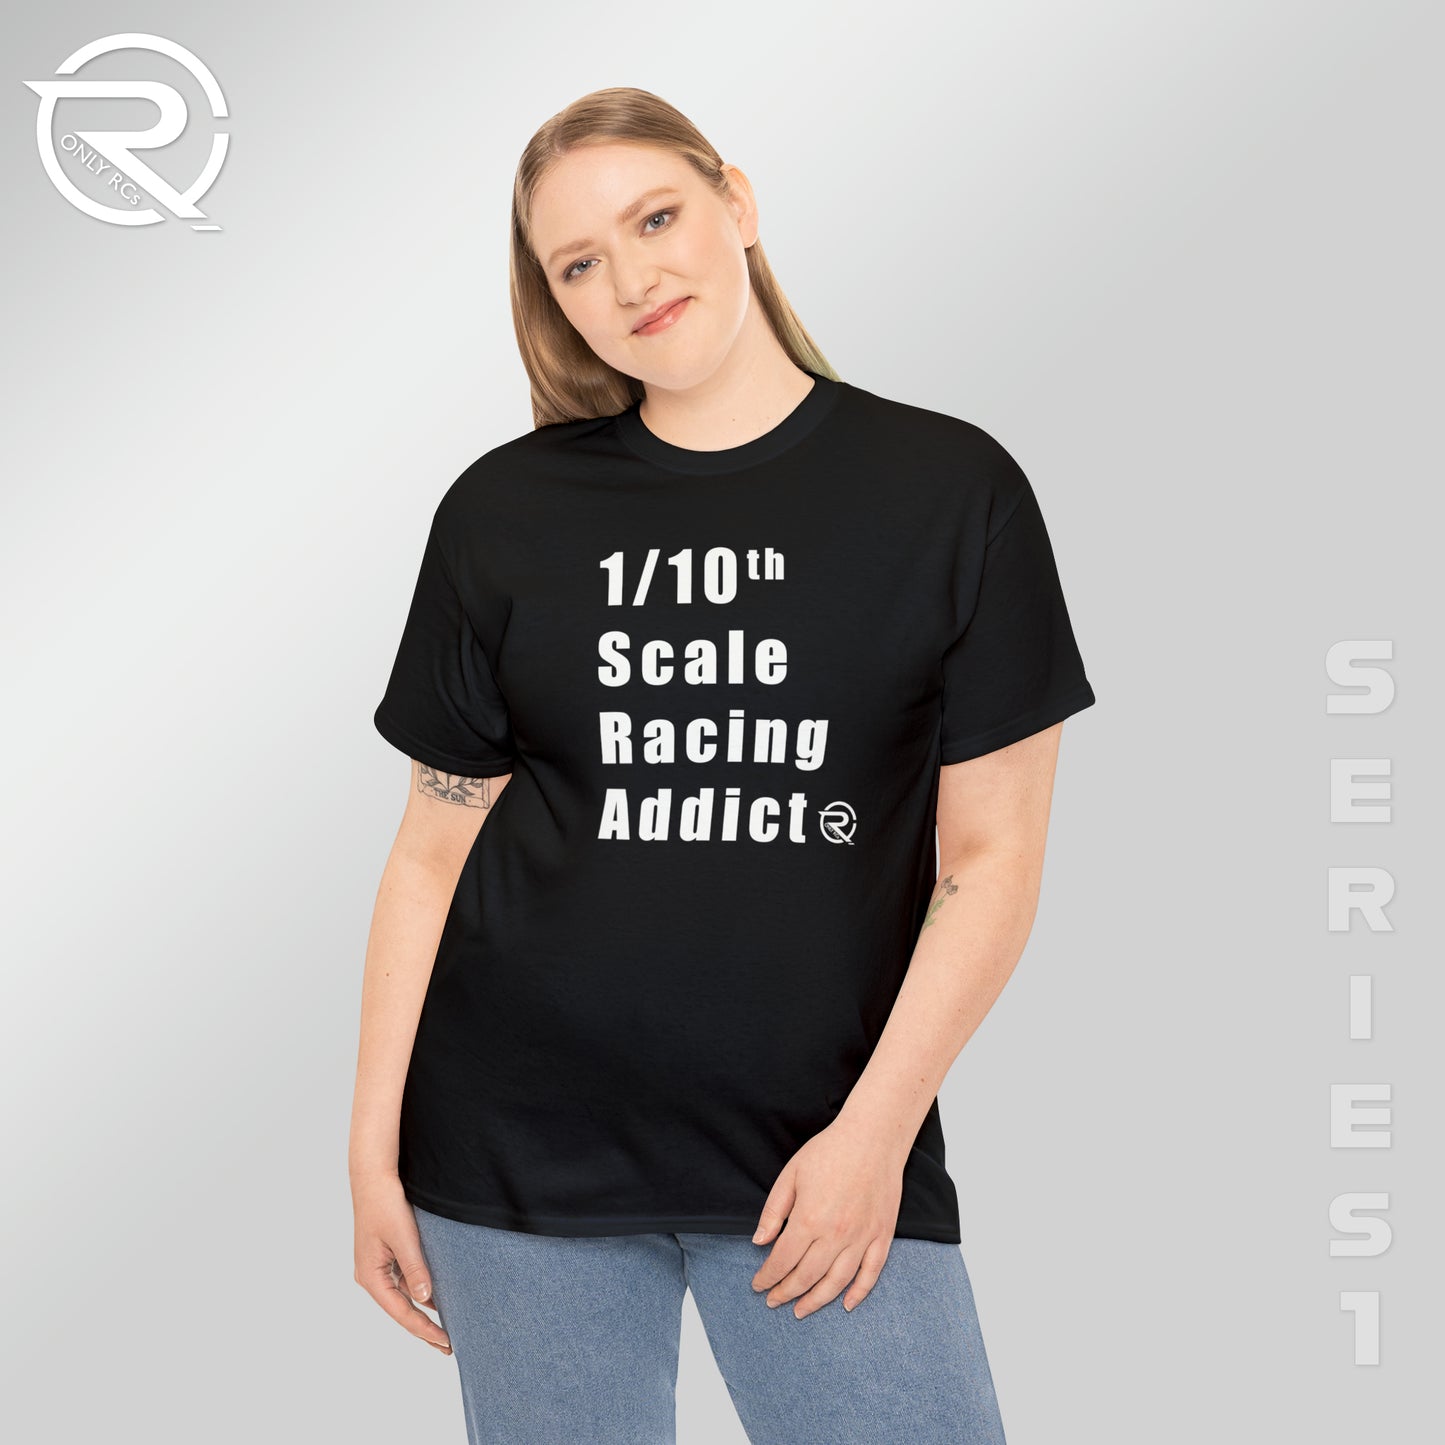 OnlyRCs - 1/10th Scale Racing Addict Heavy Cotton Tee - Series 1